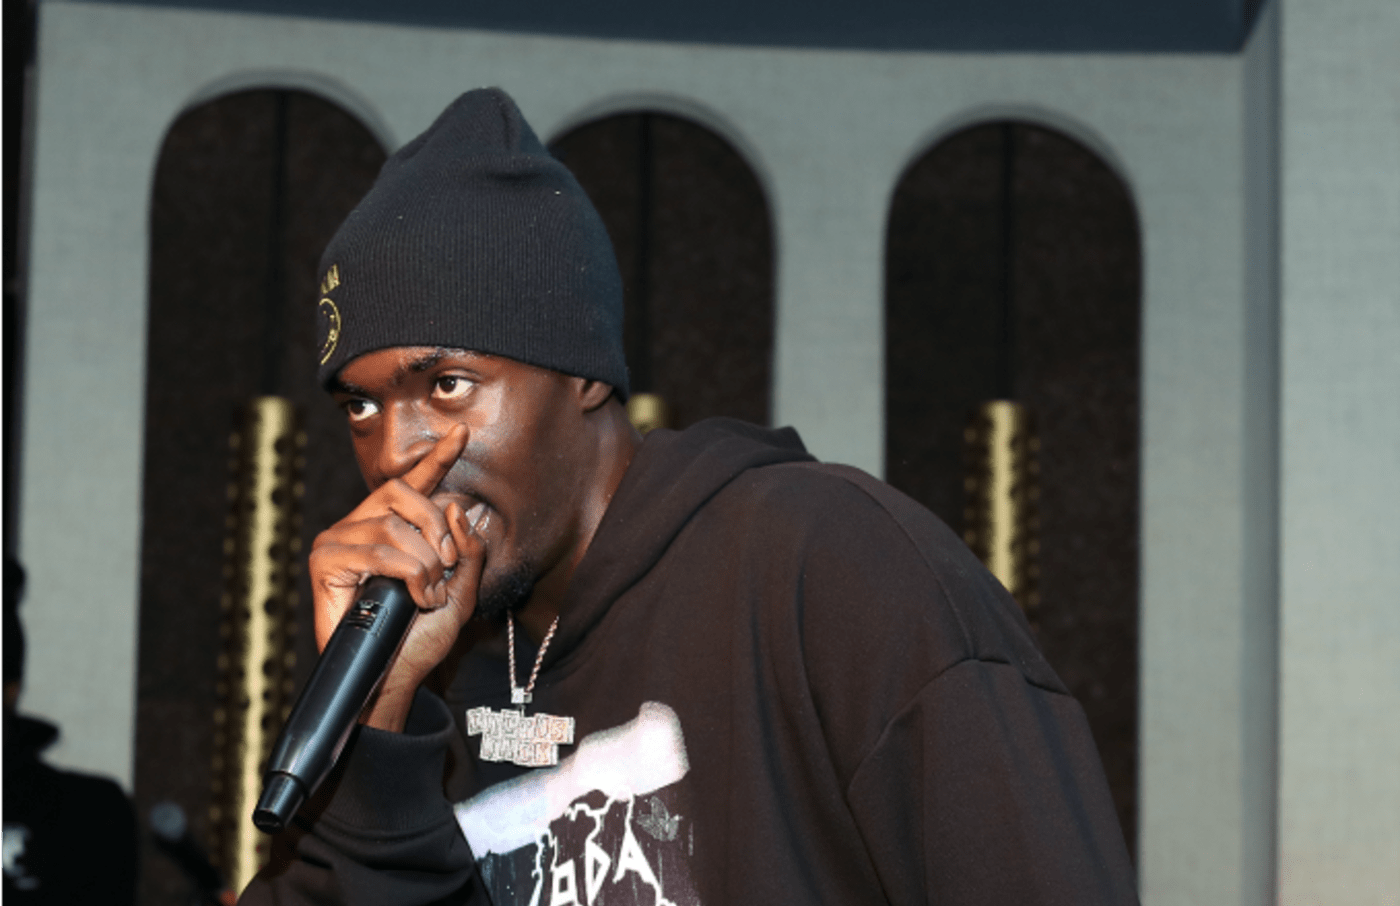 Sheck Wes performs at LiveXLive Post Grammy Party